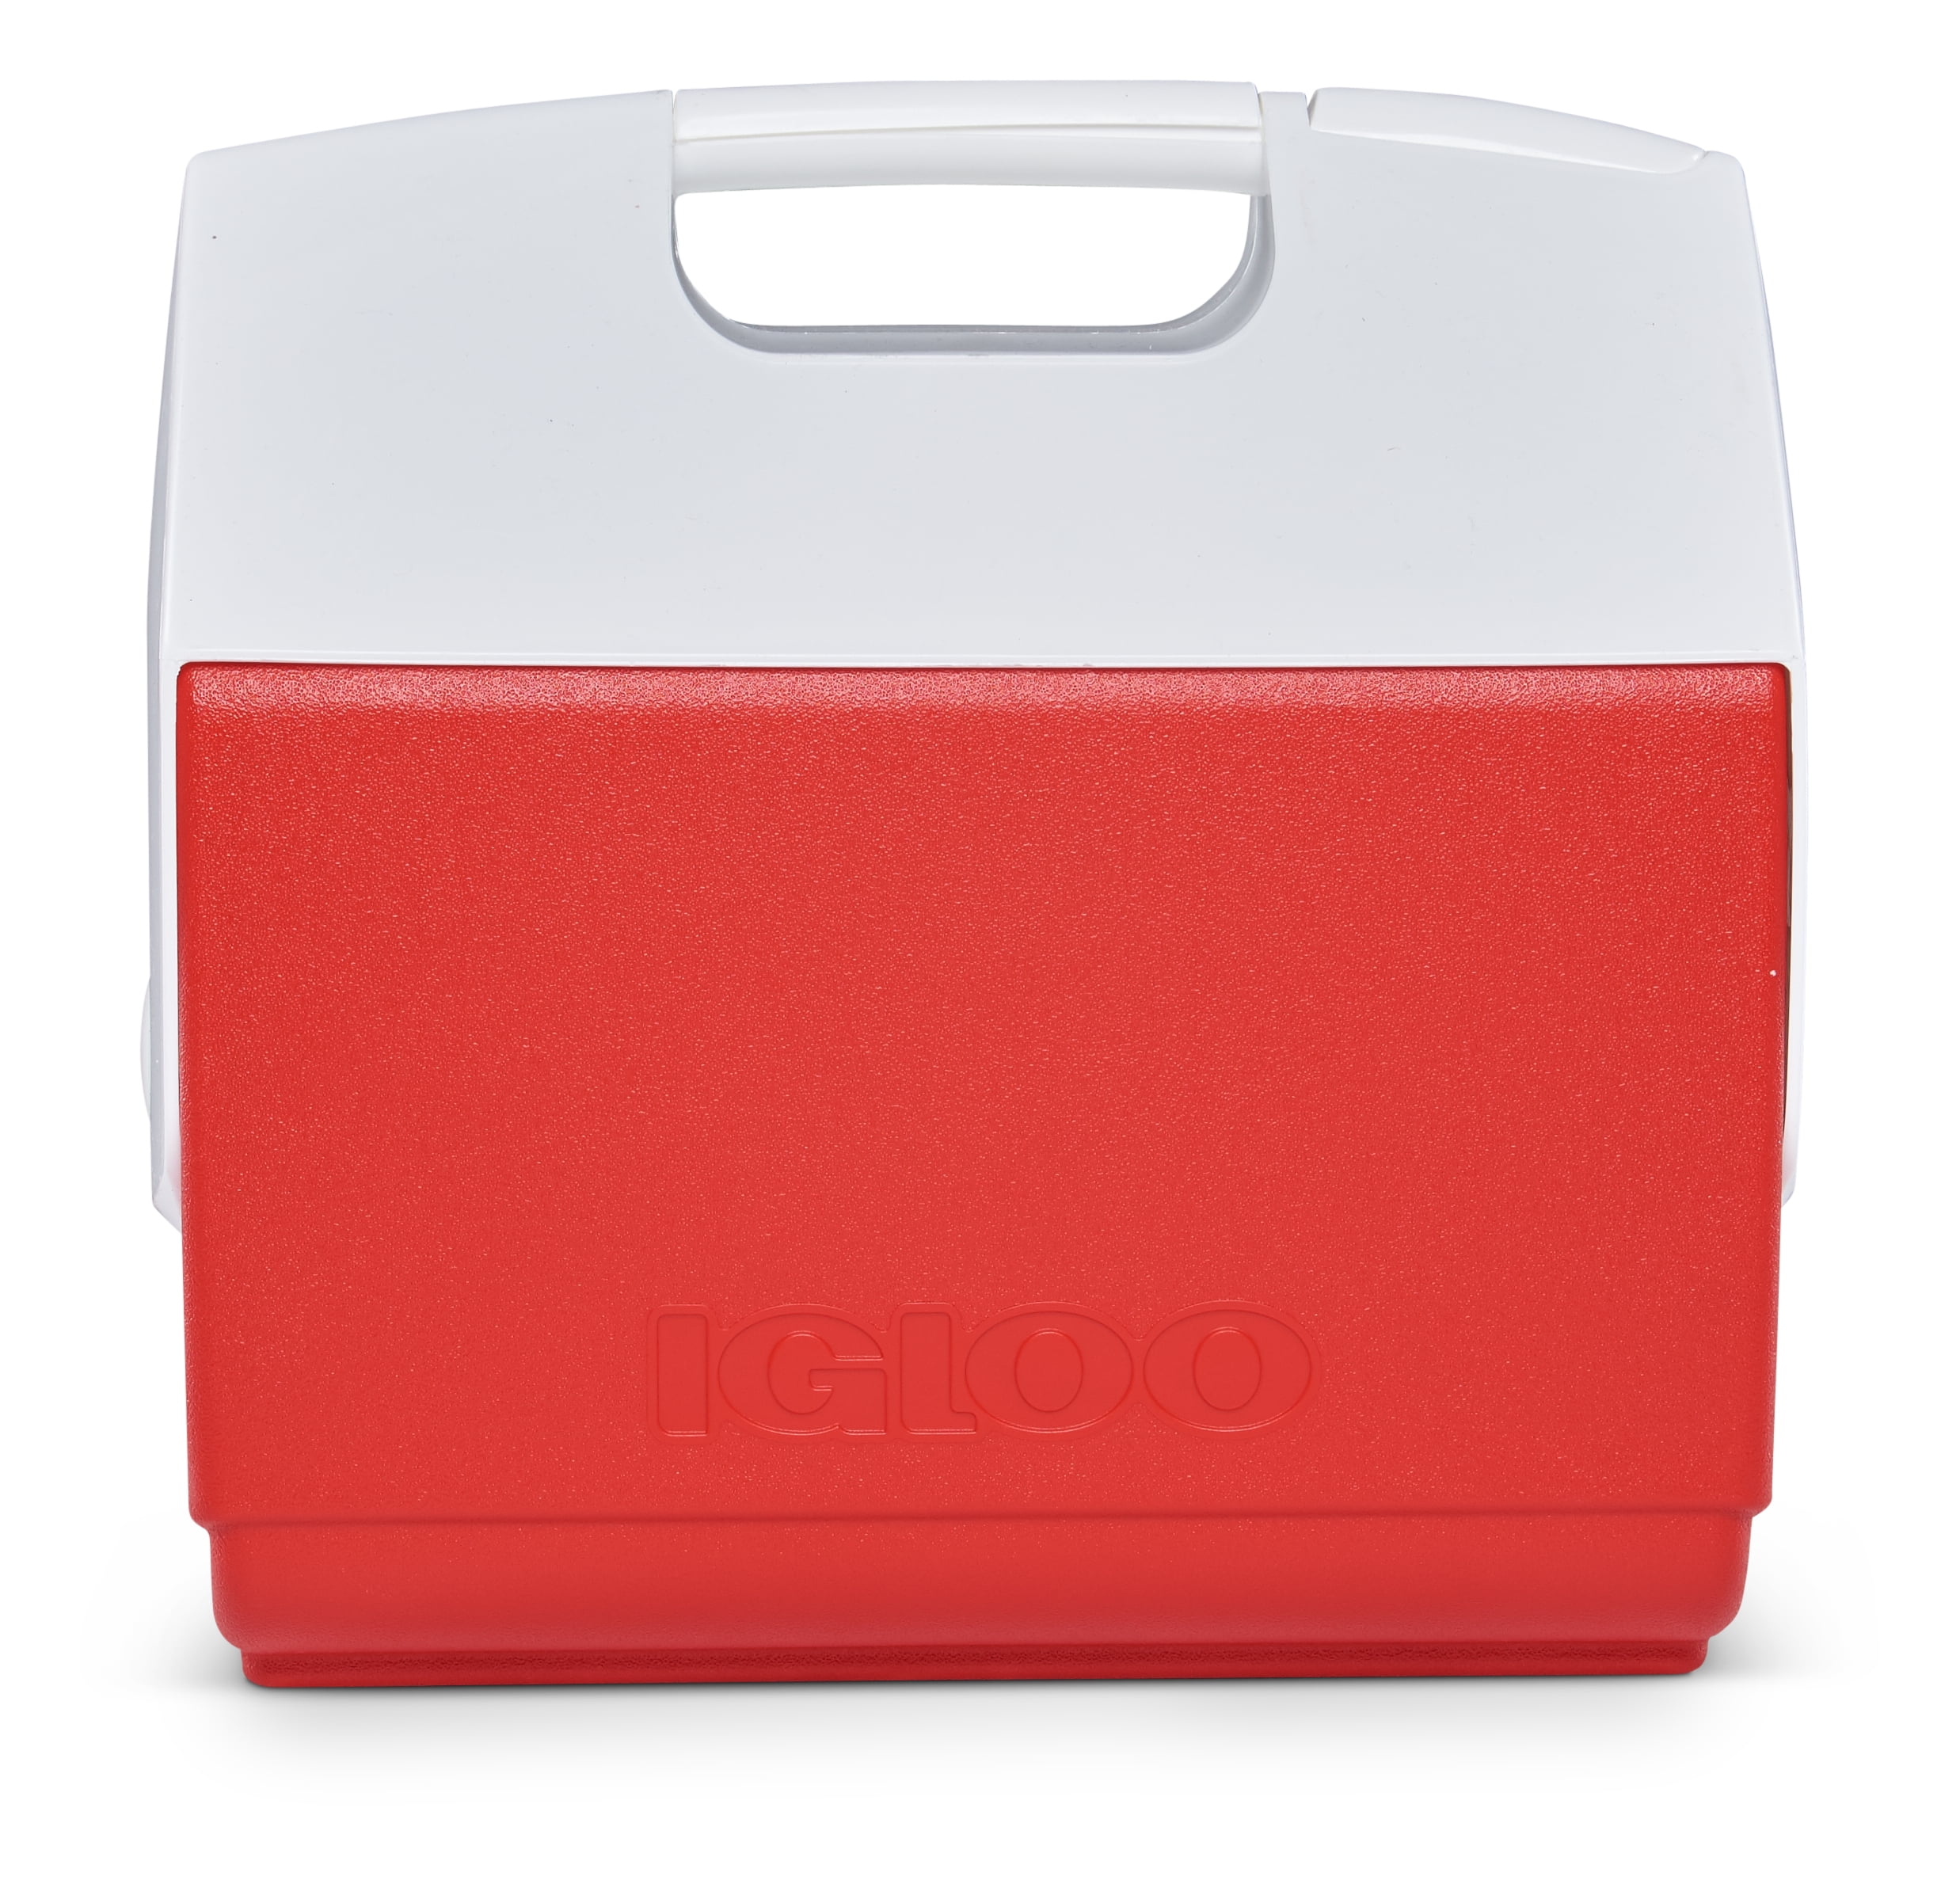 Igloo 16 QT Playmate Elite Ice Chest Cooler, Red 30 Can Capacity